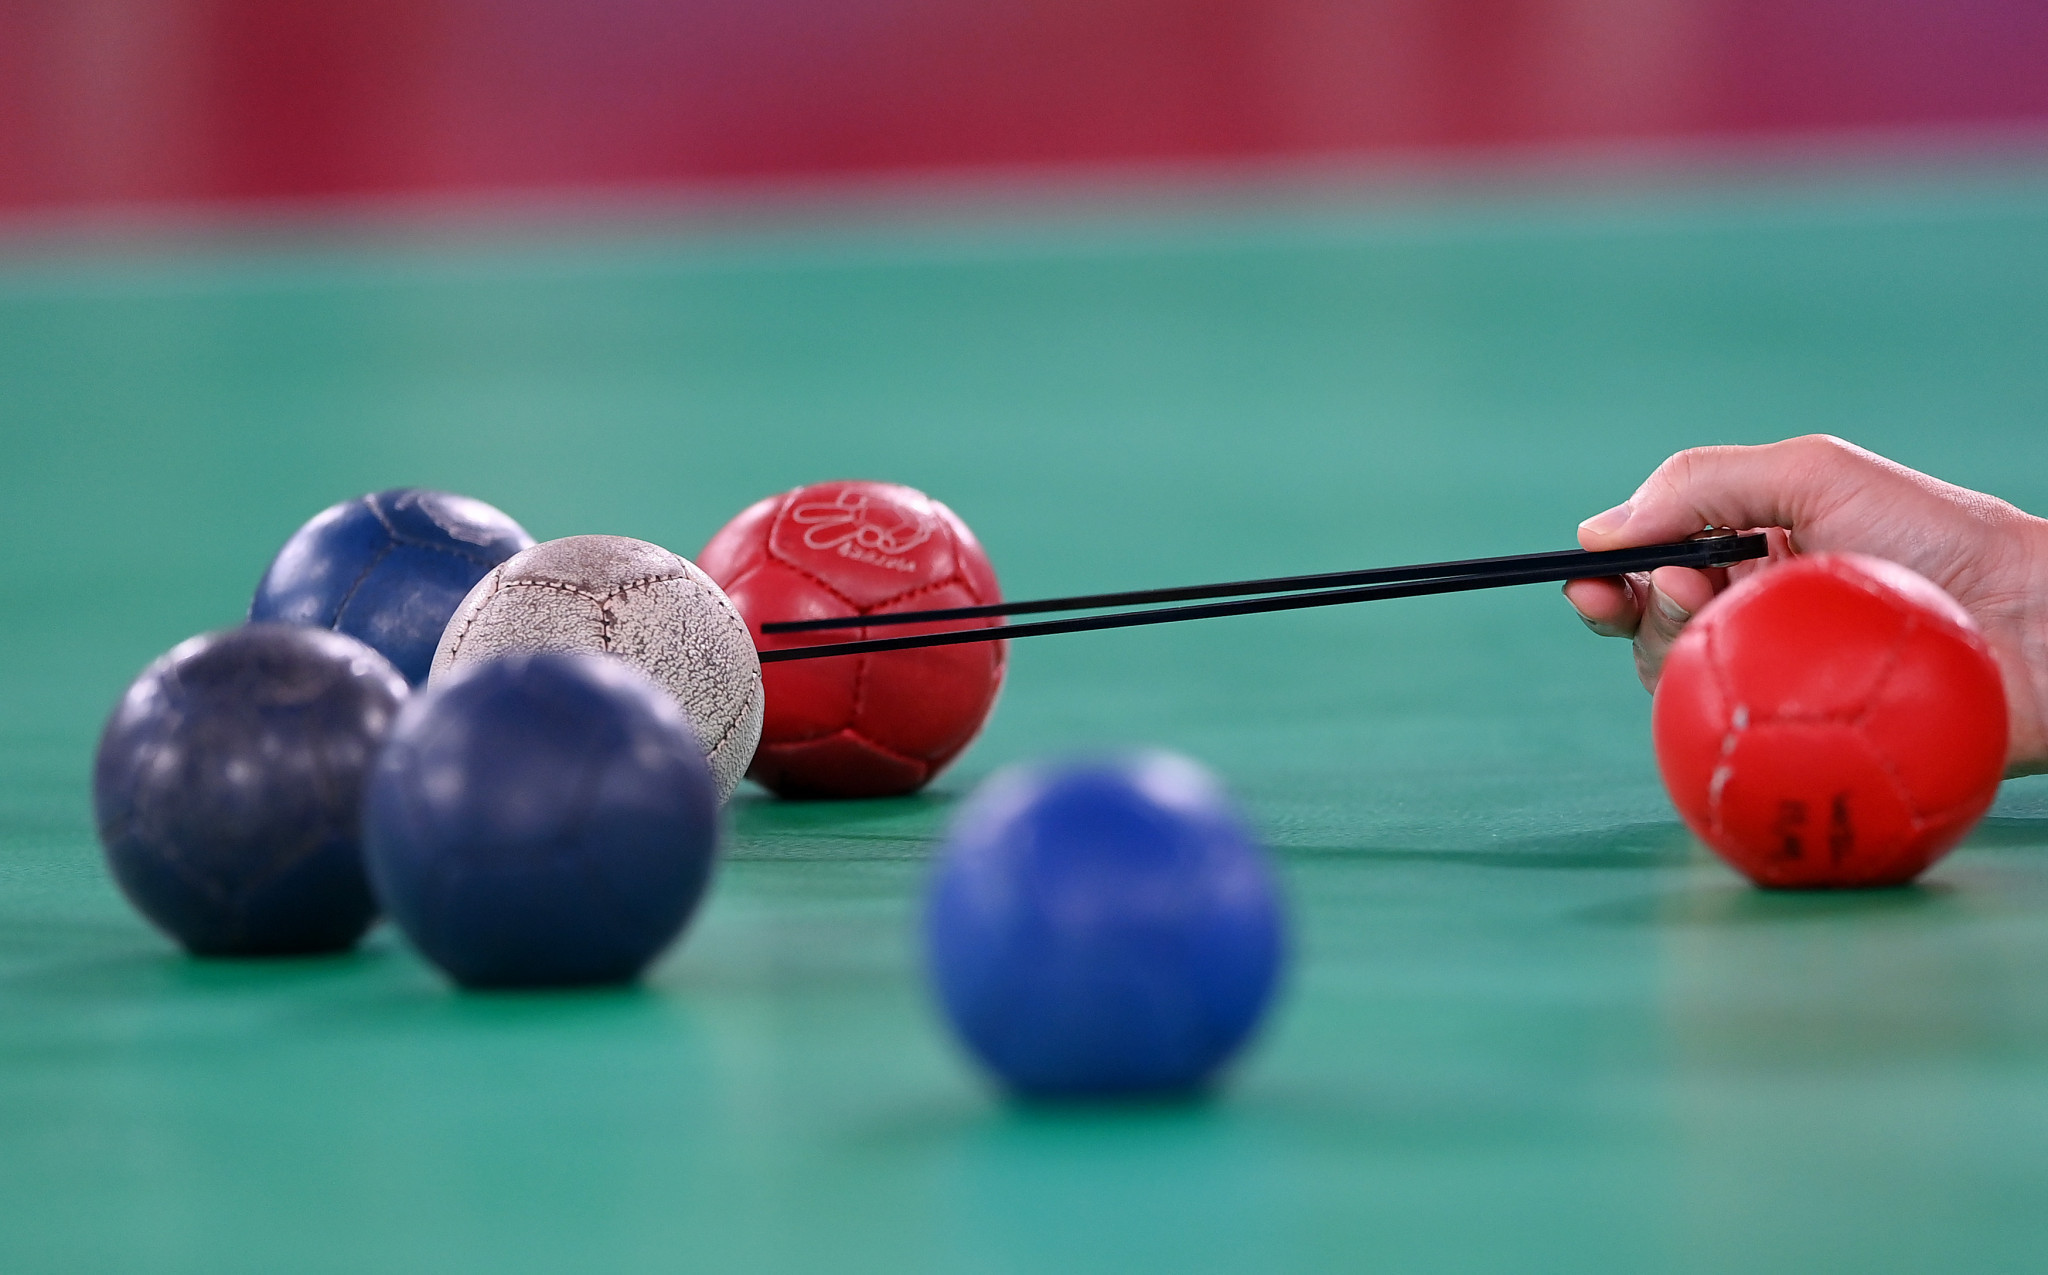 The Boccia International Sports Federation recently introduced ball-licencing regulations for international competition to ensure fairness ©Getty Images